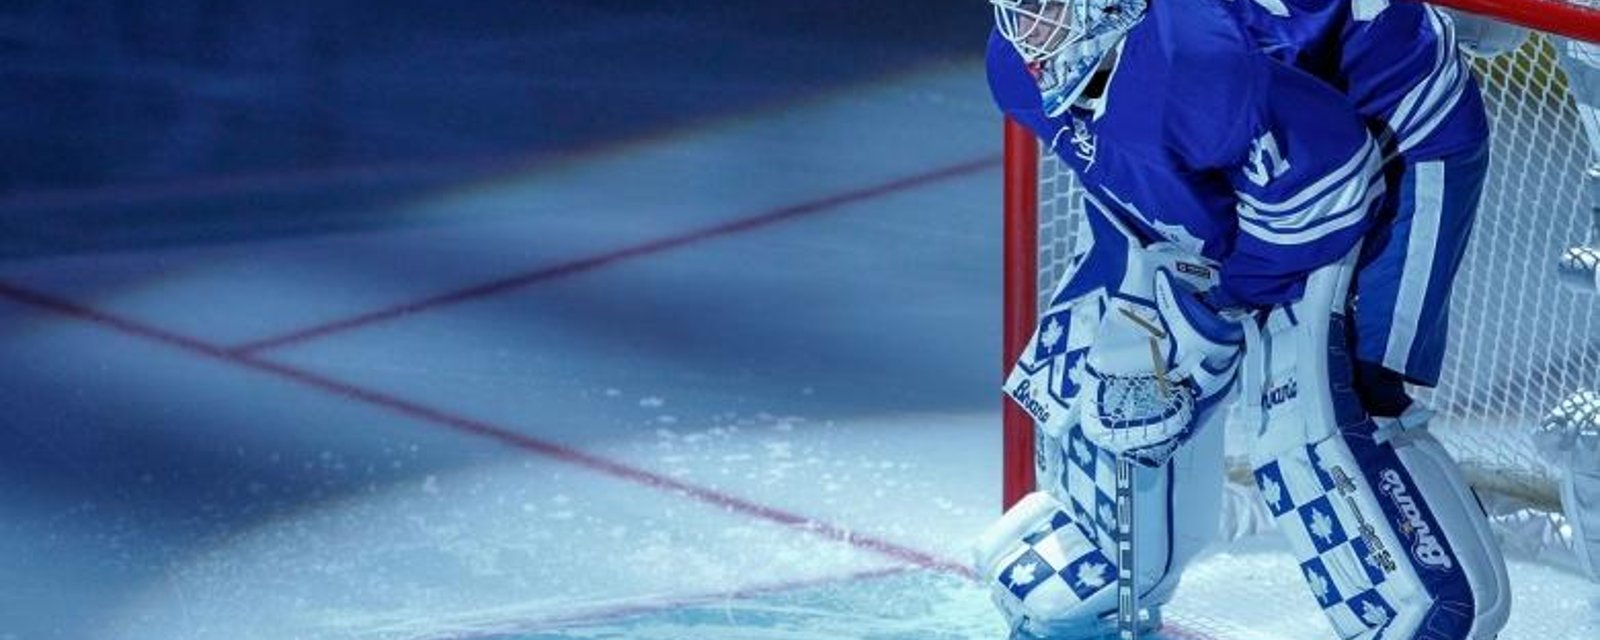 Leafs sign another goalie, but they still may not be done.